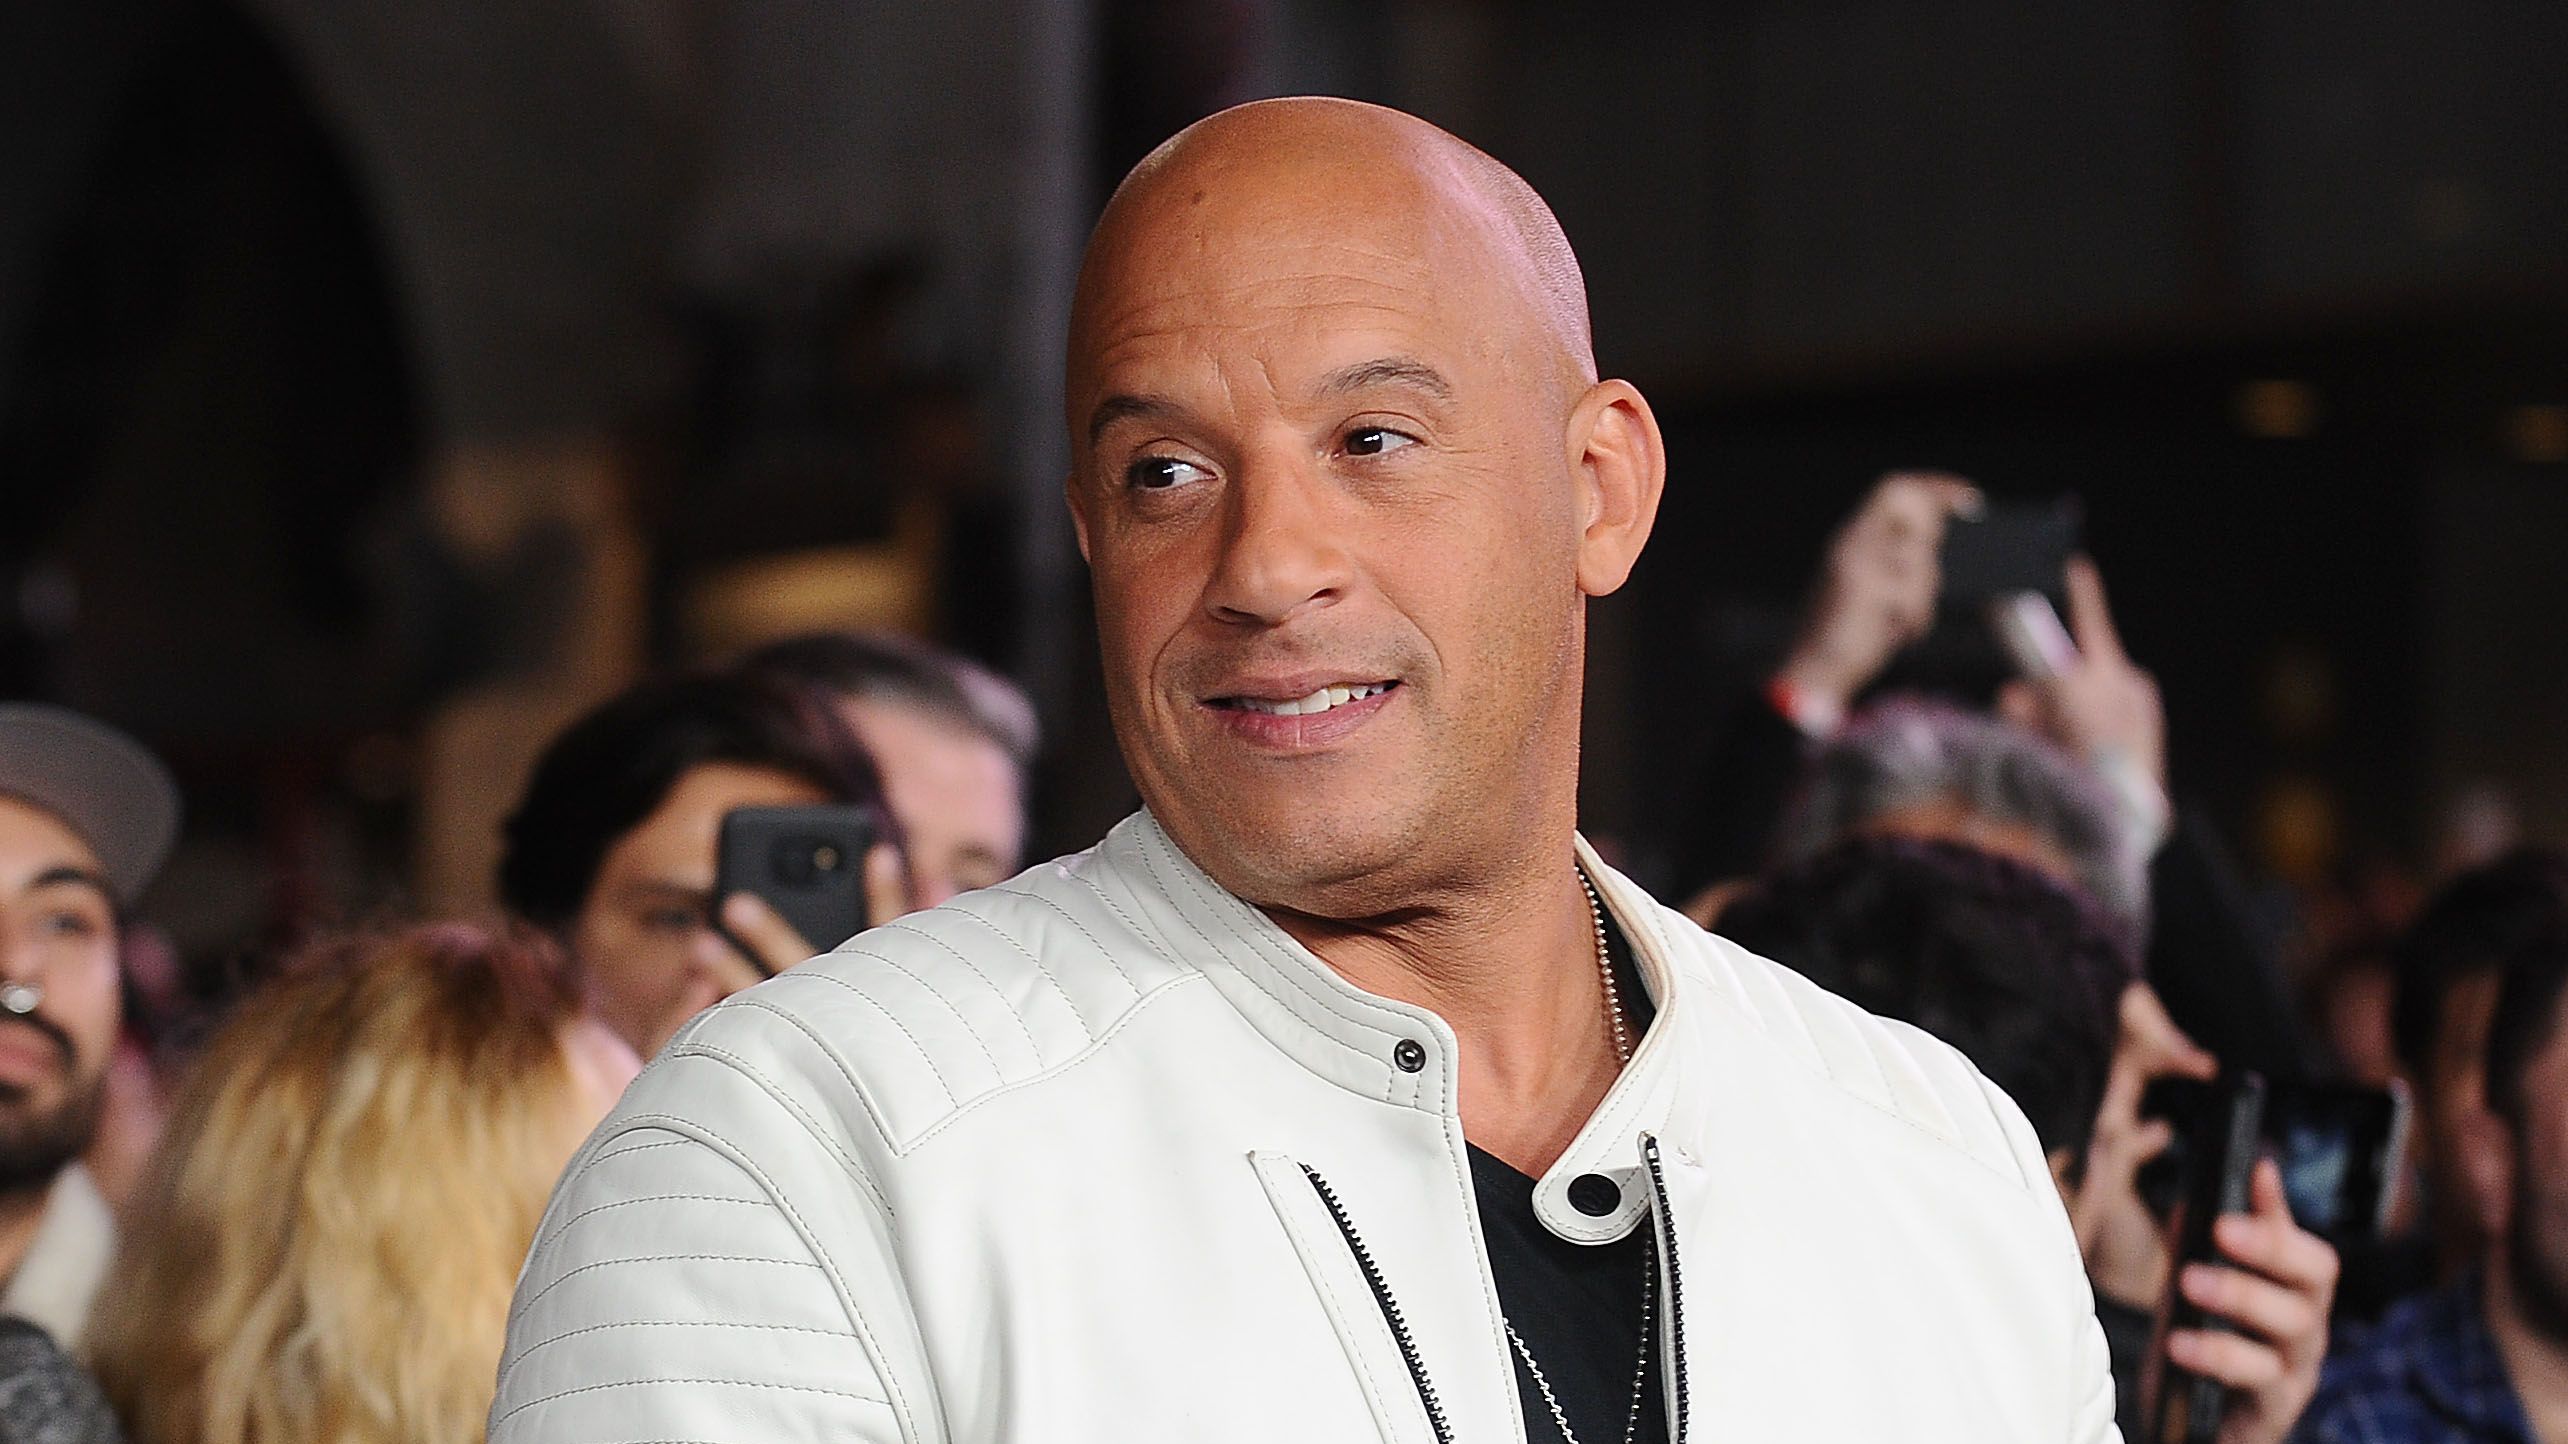 https://hips.hearstapps.com/hmg-prod/images/actor-vin-diesel-attends-the-premiere-of-xxx-return-of-news-photo-1612209263.?crop=1xw:0.78848xh;center,top